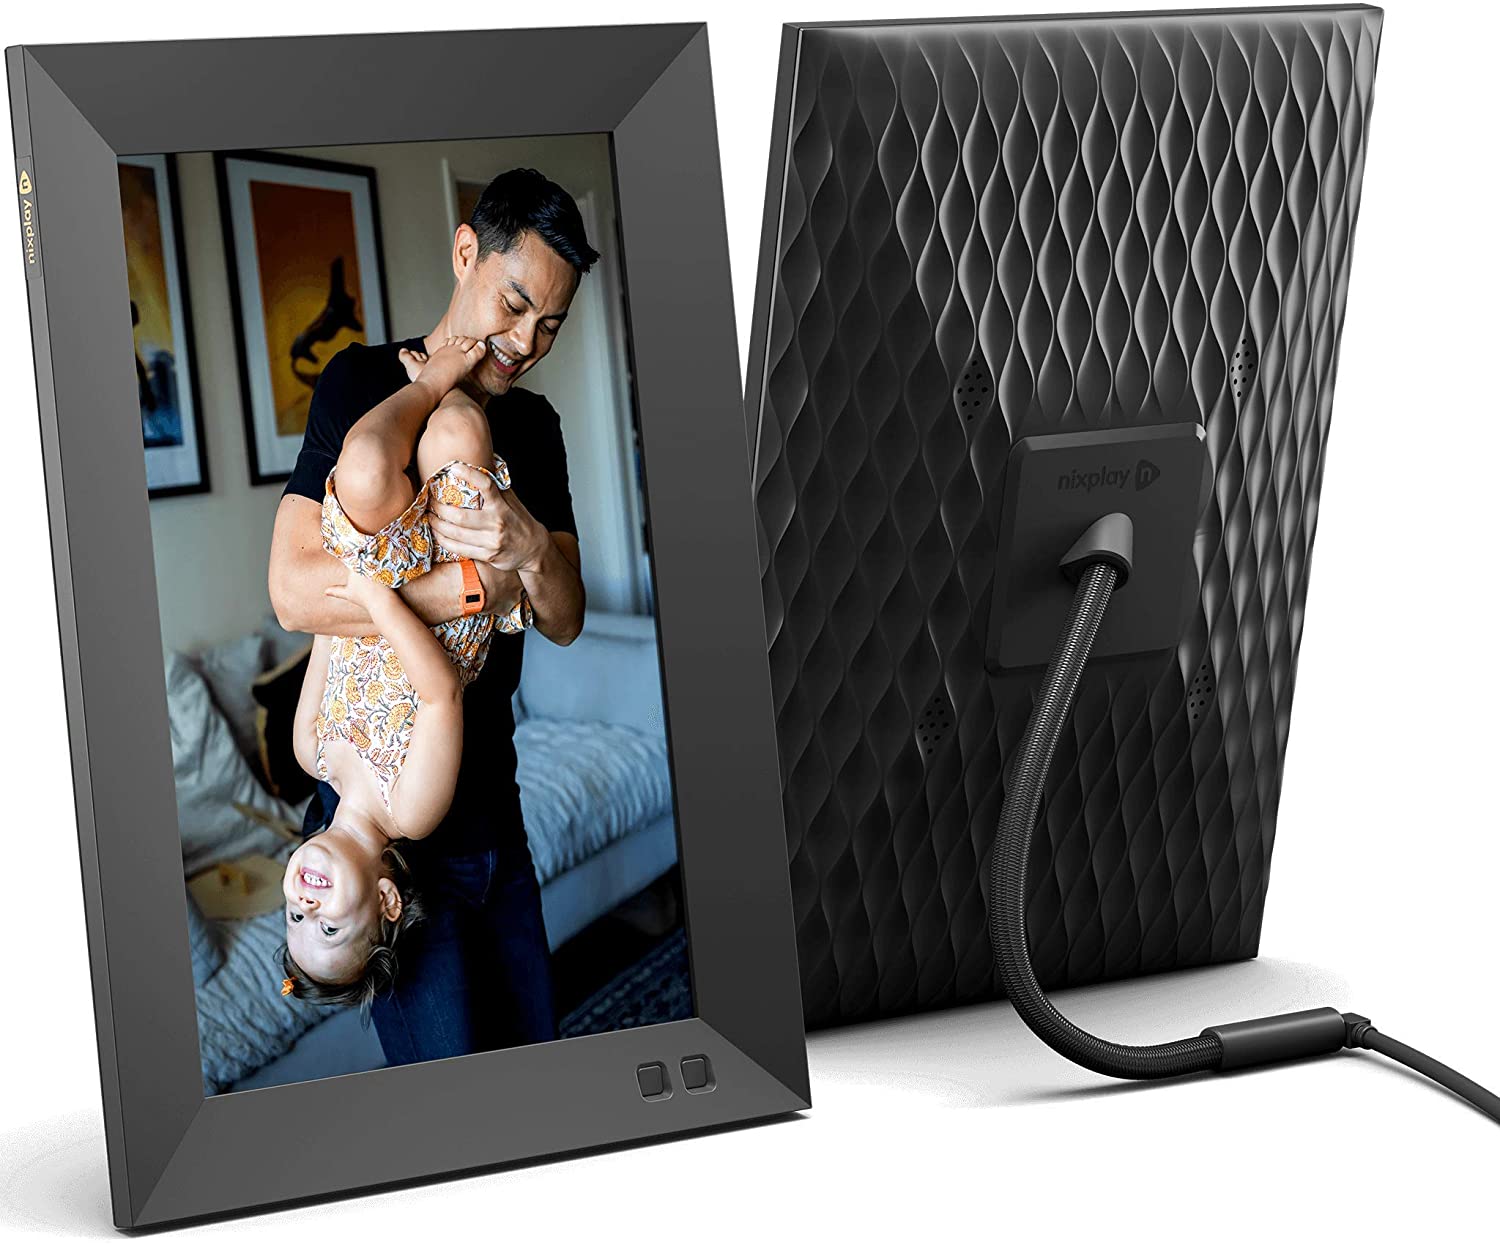 Nixplay Smart Wi-Fi Digital Photo Frame W10J - Share Photos and Videos Instantly - image 1 of 6